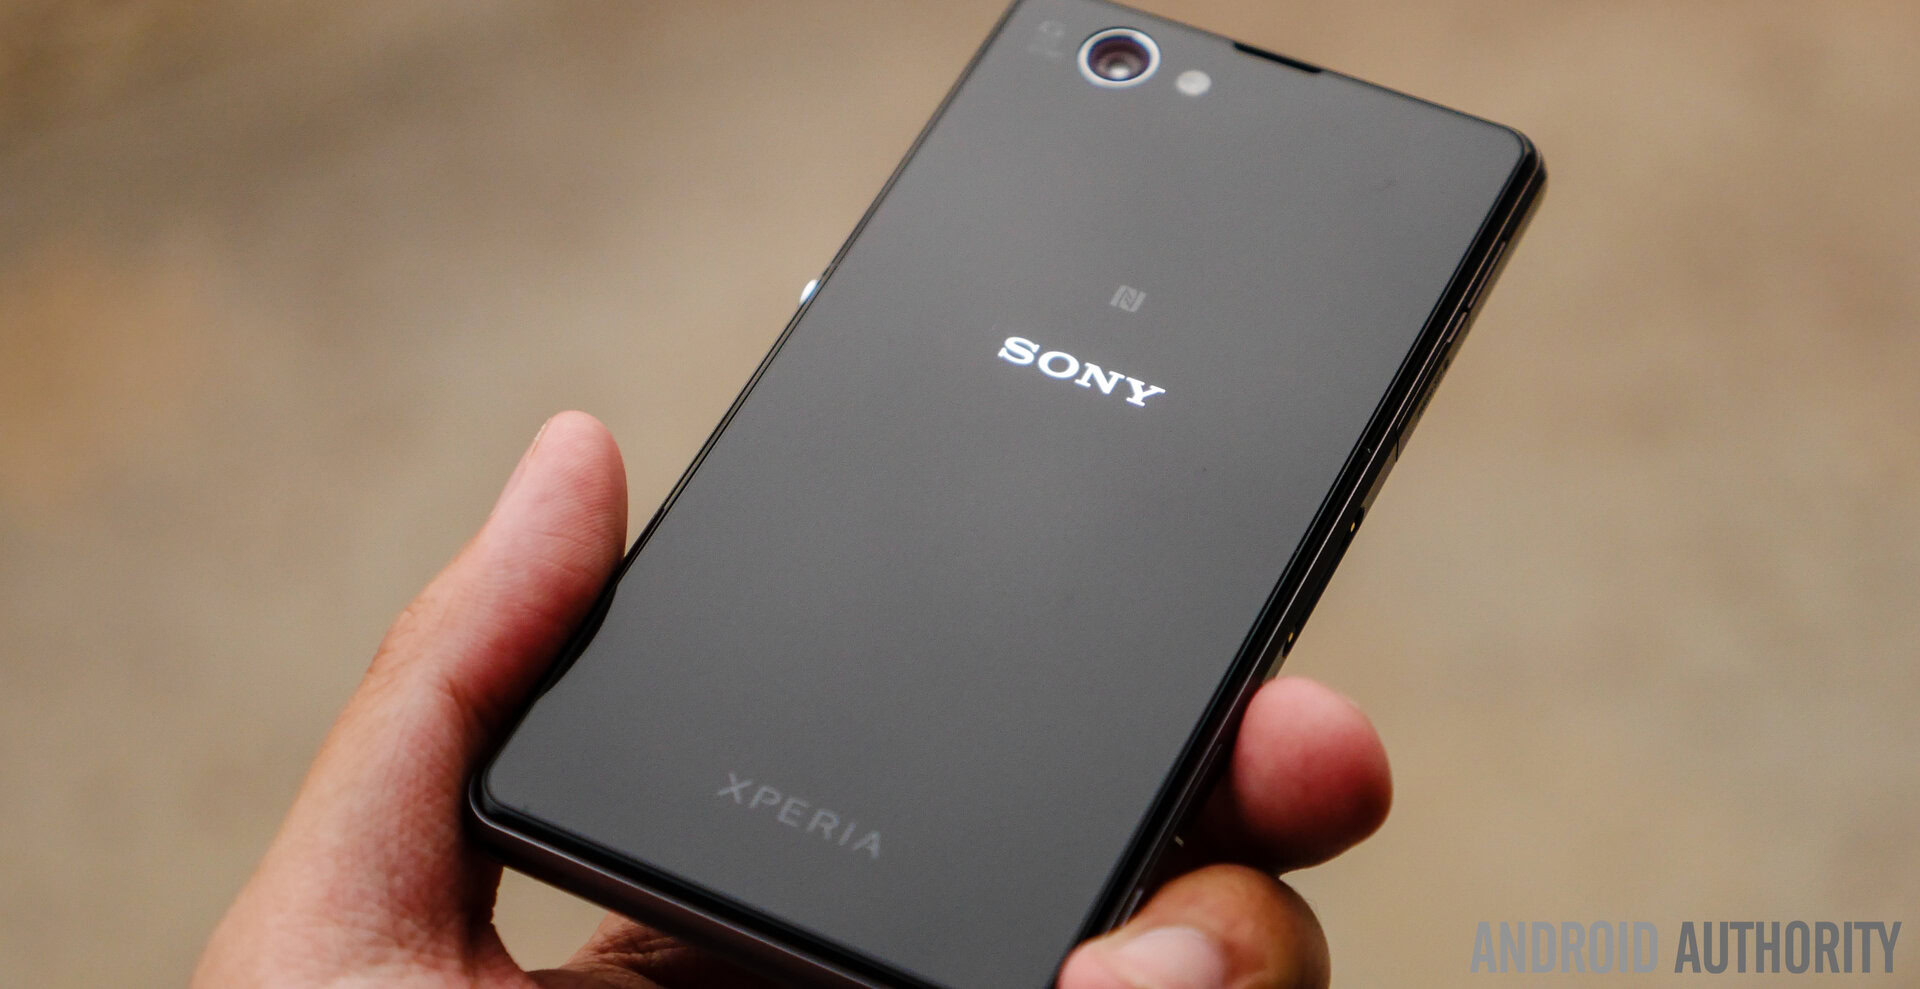 spreken hop bungeejumpen Sony Xperia Z3 Compact specs and image leaked